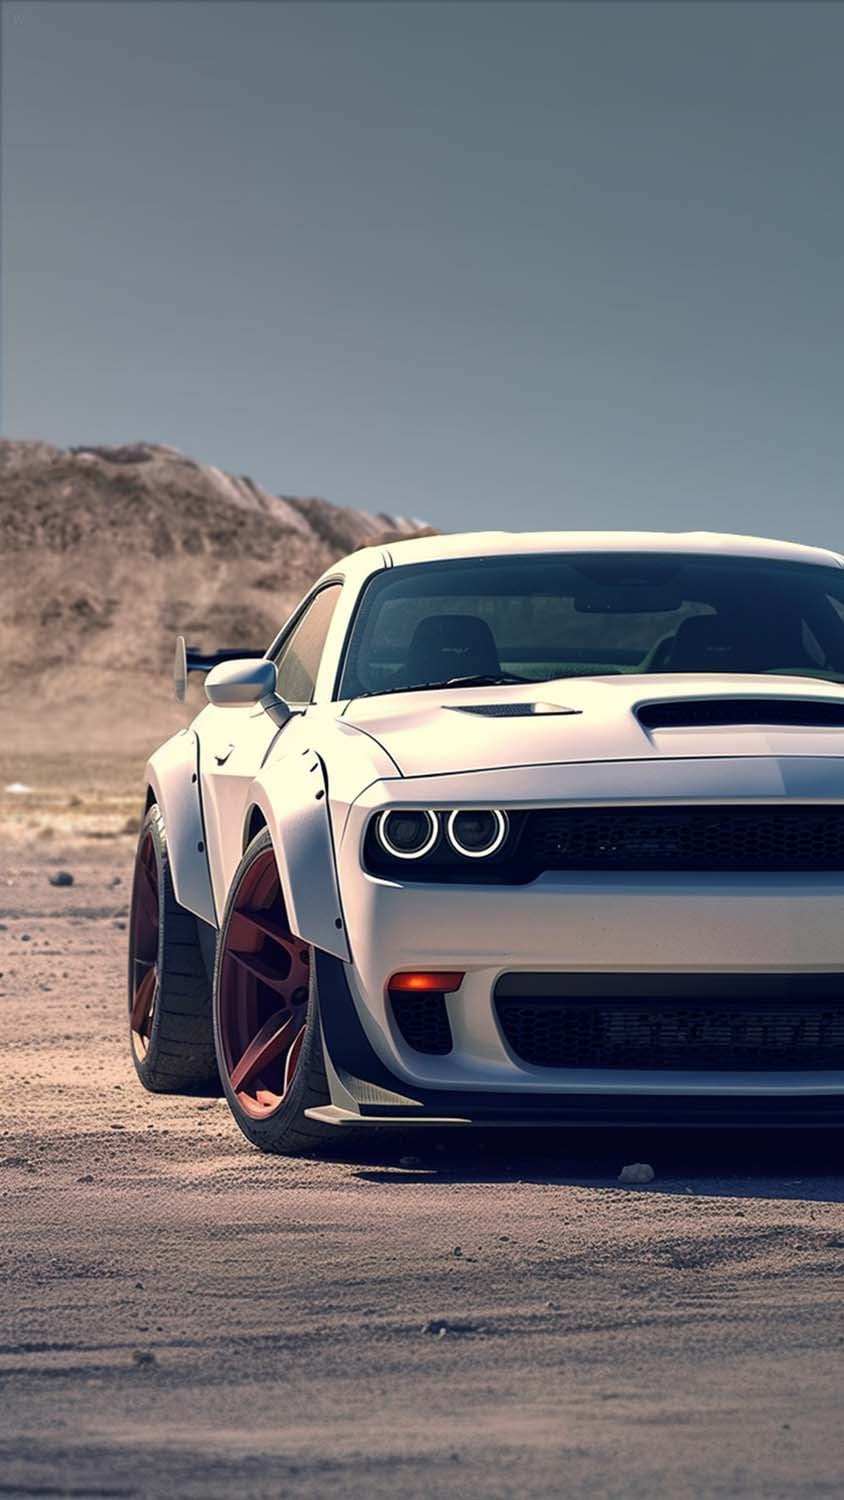 Dodge Challenger wallpaper by RokoVladovic  Download on ZEDGE  f0ae